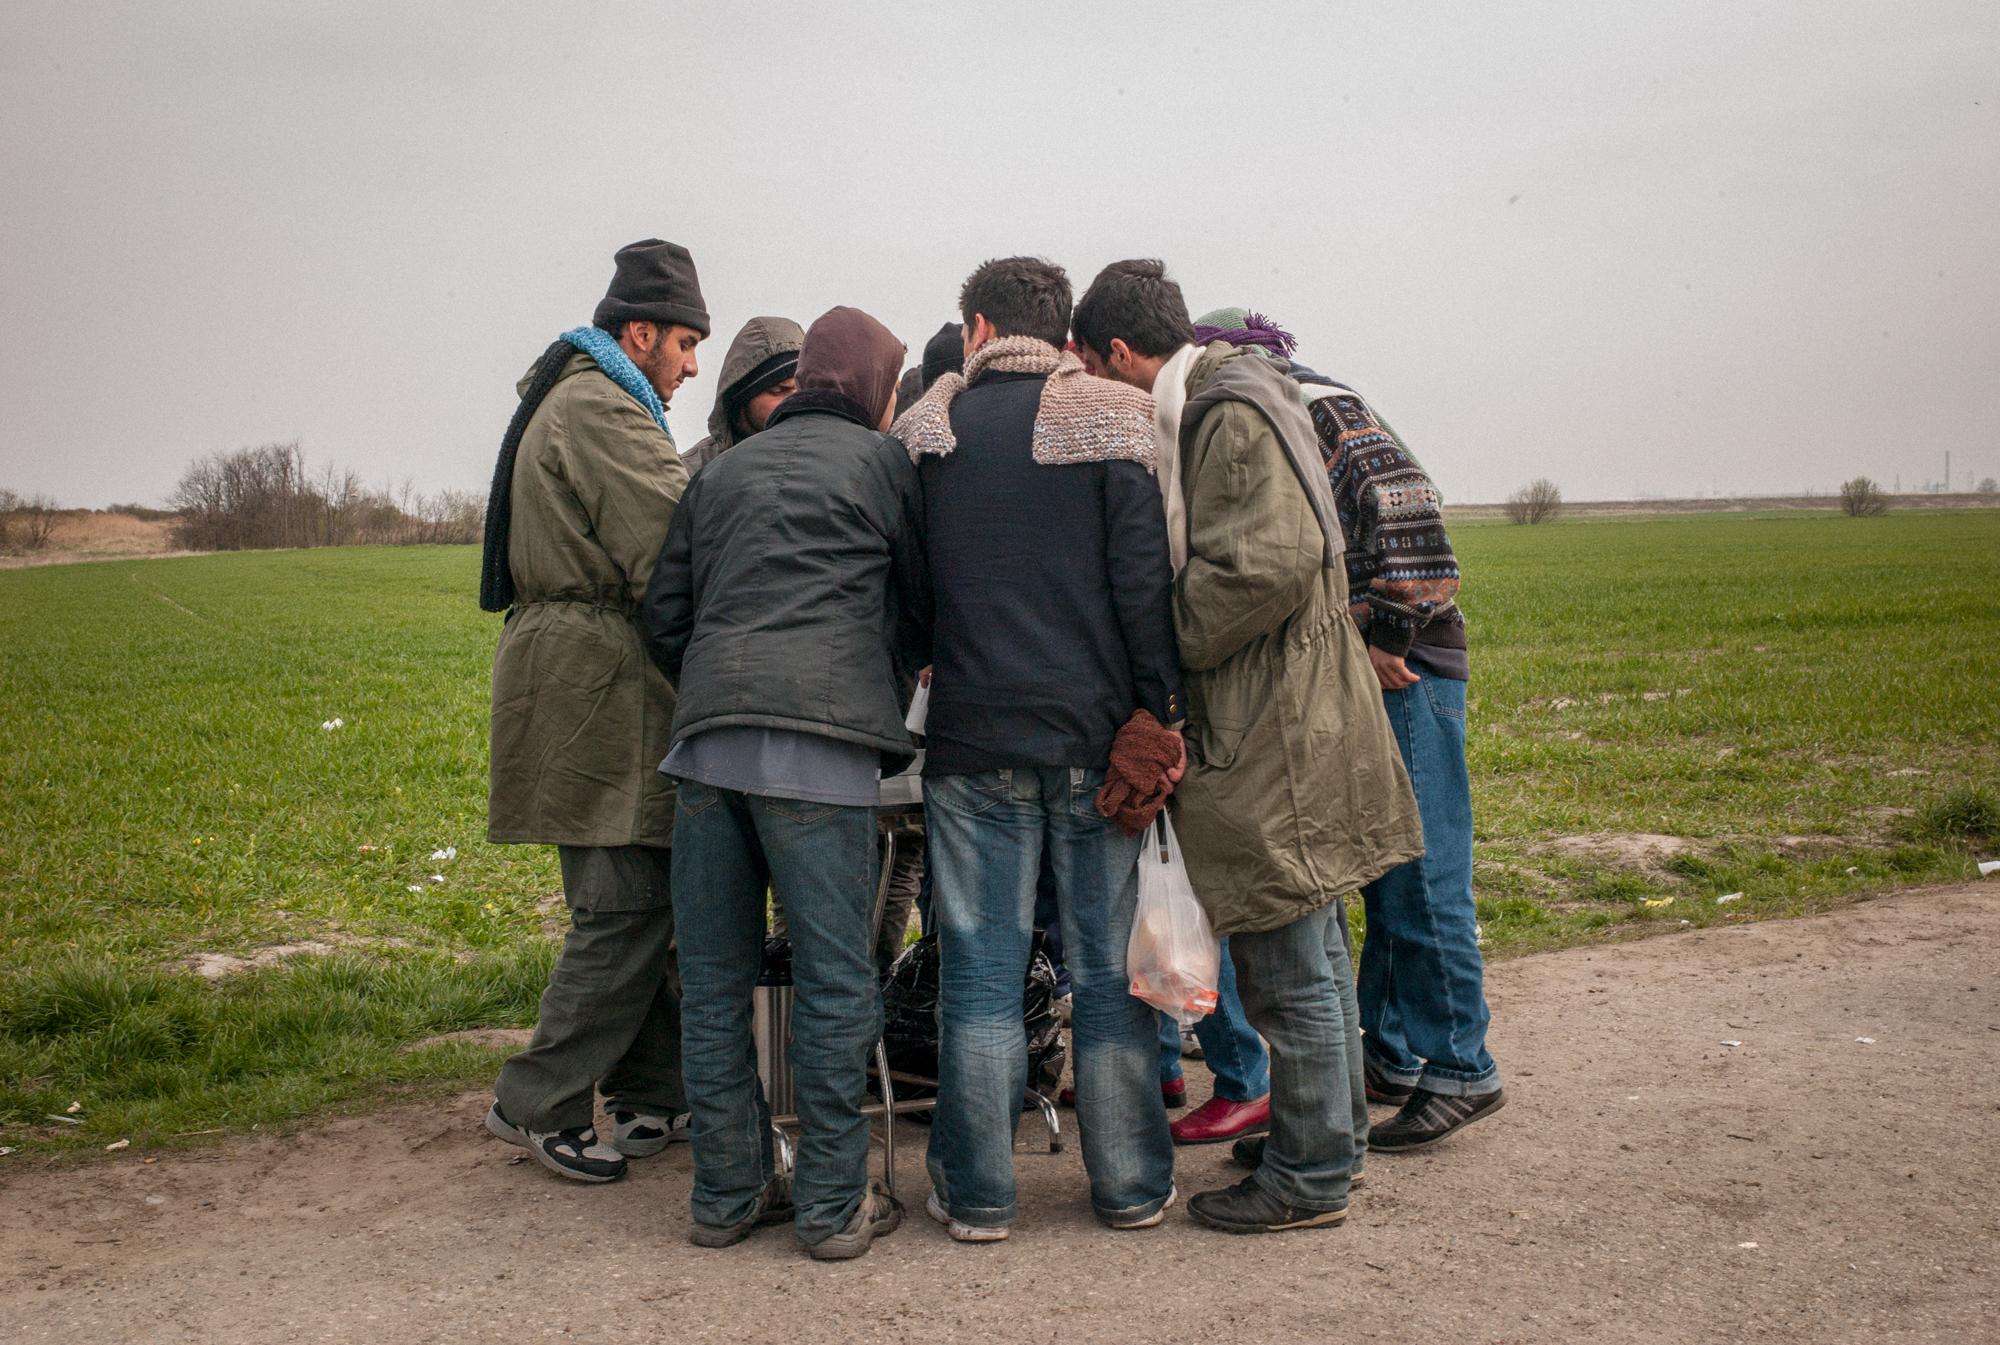 Migrants in Calais, France (2008) - Kurdish and Afghan immigrants gather to receive clothing...